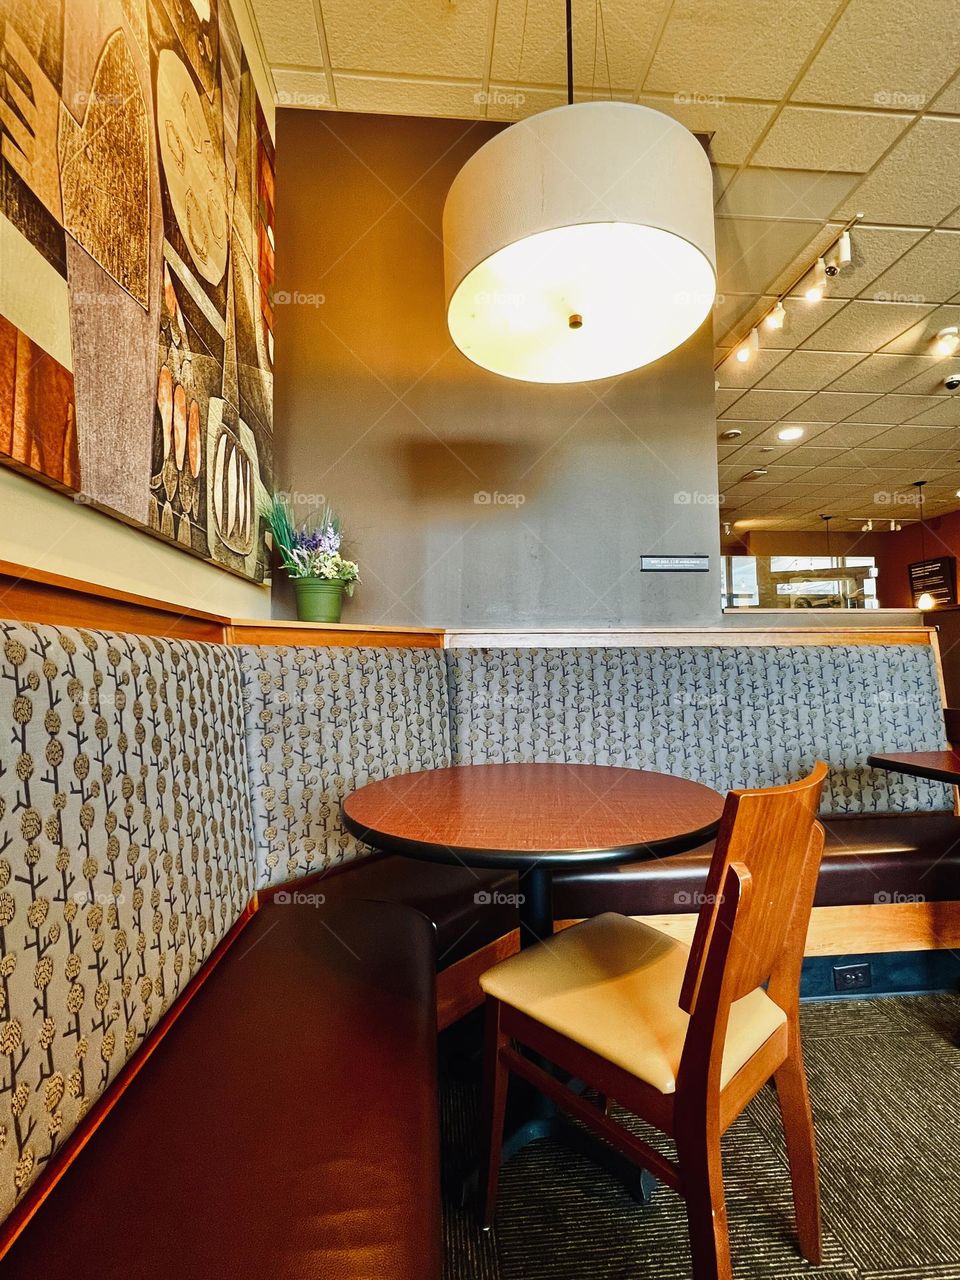 Corner banquette seating in coffee shop. Round wooden table and chair against padded bench with round  drop light fixture. Abstract art  and small potted plant with neutral warm color palette.